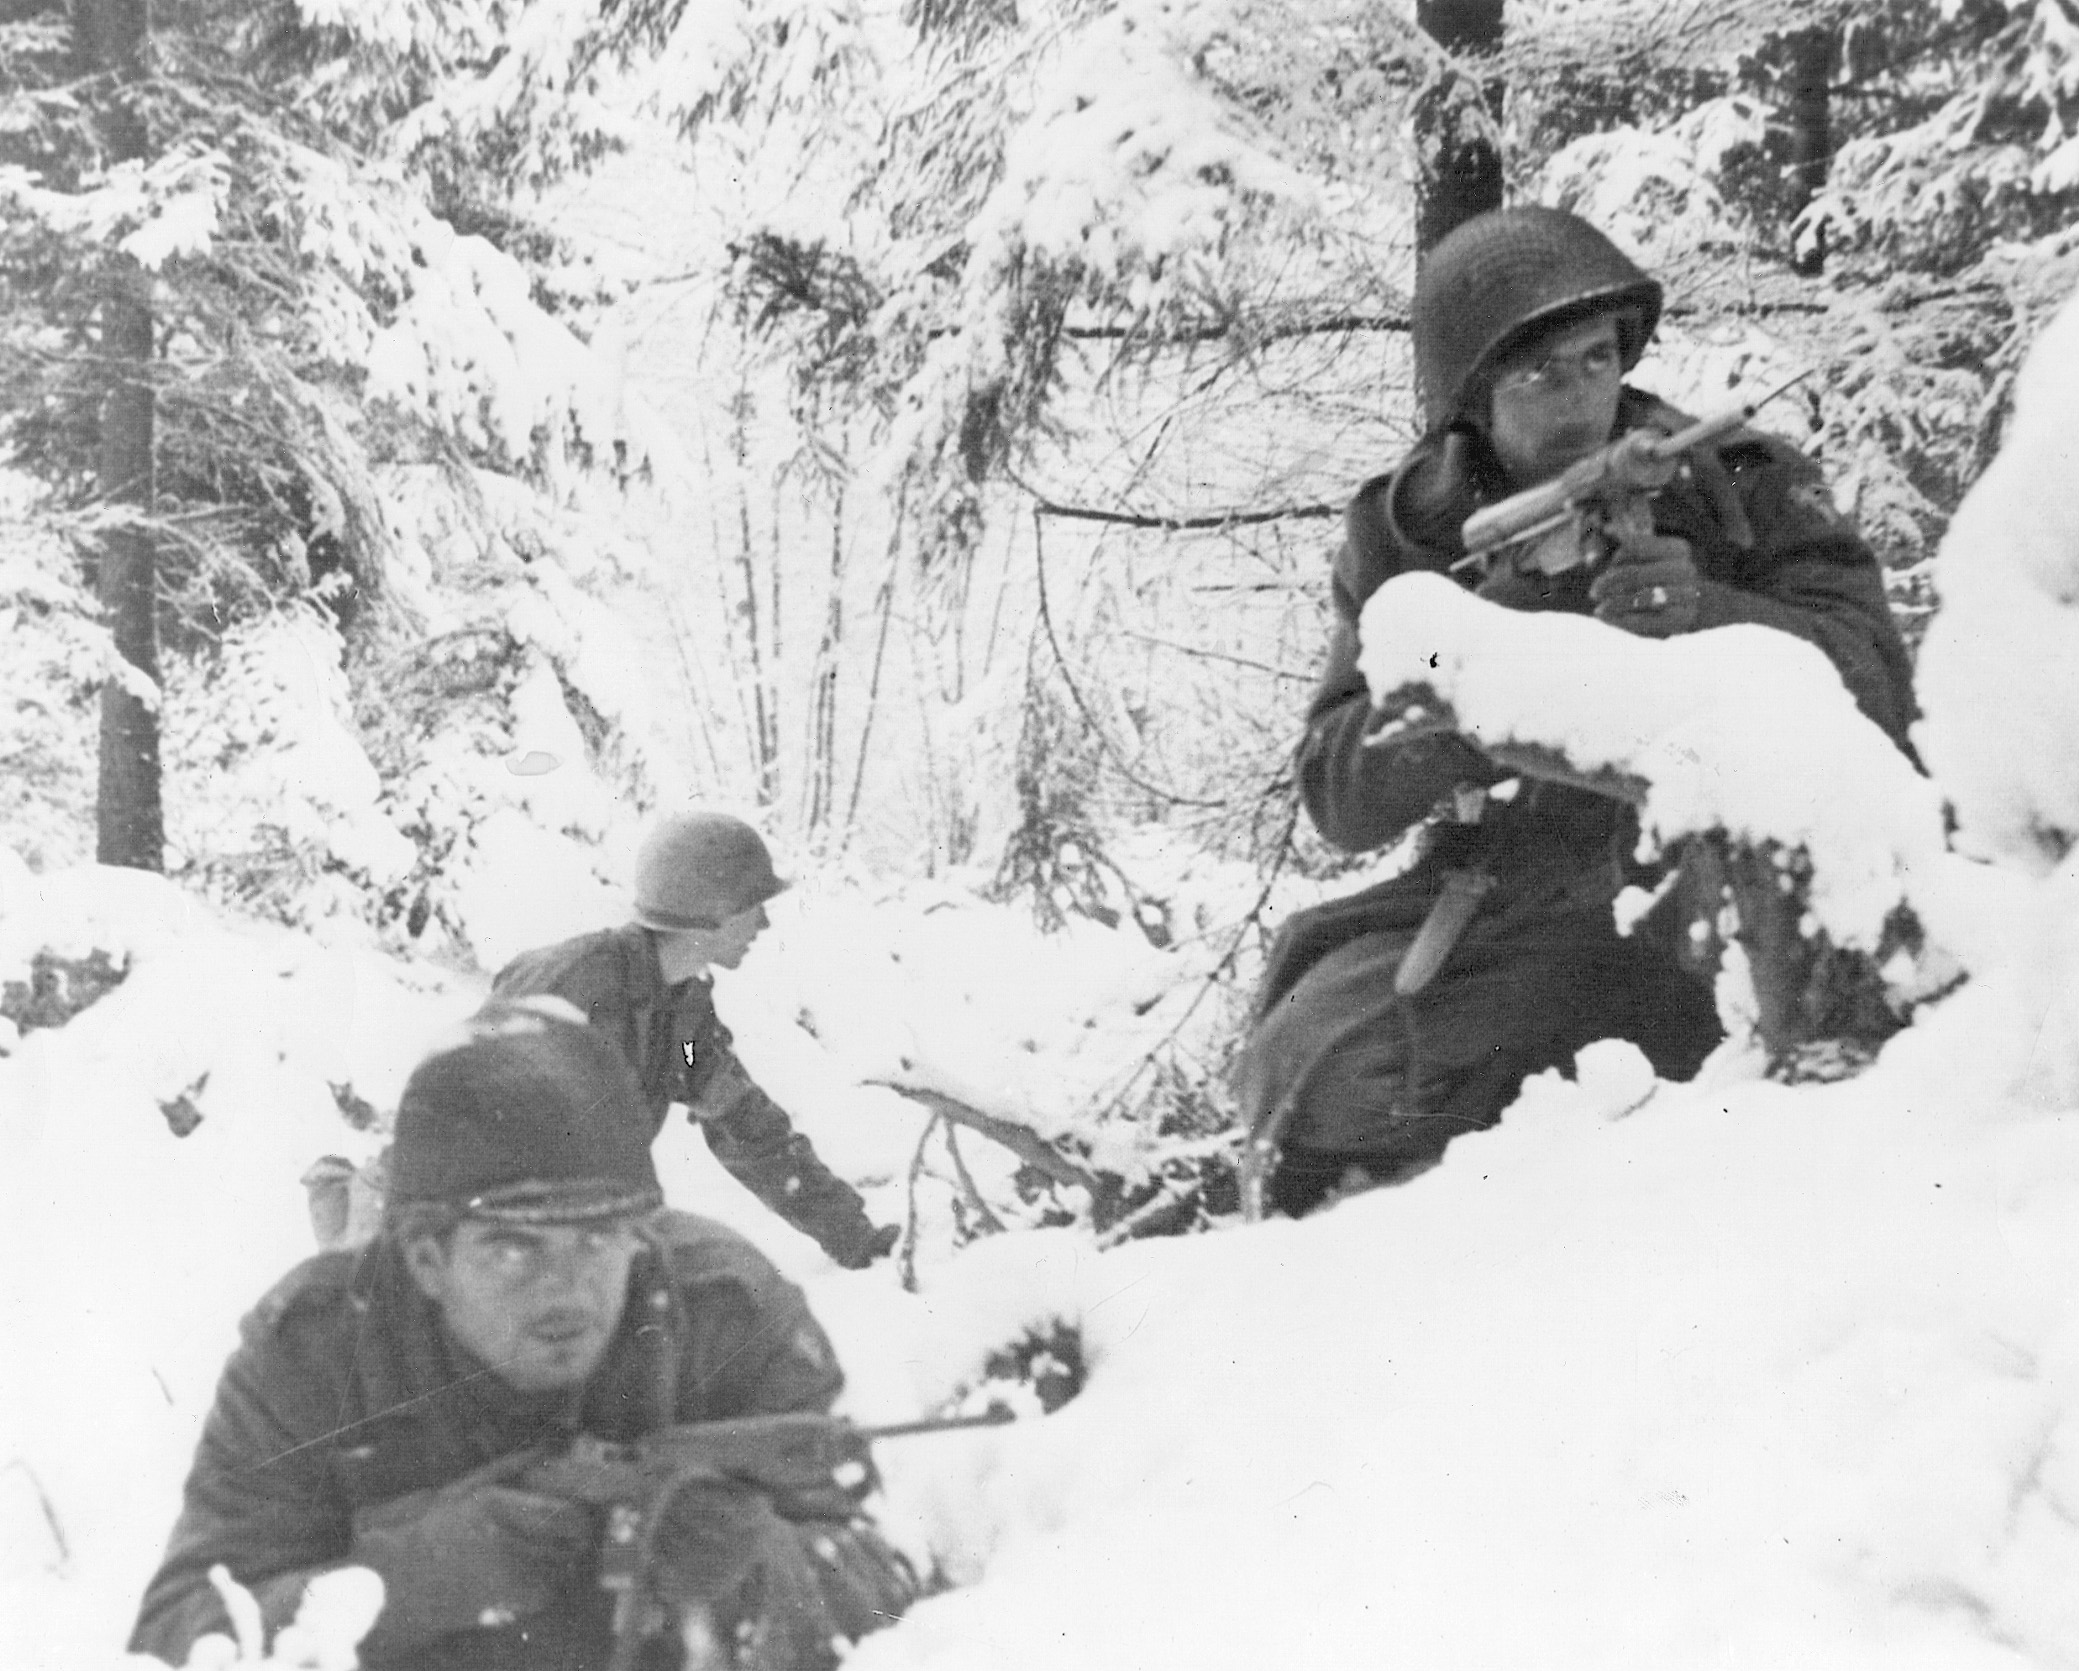 Americans prepare for battle in the snow. Many froze to death in the extreme cold.